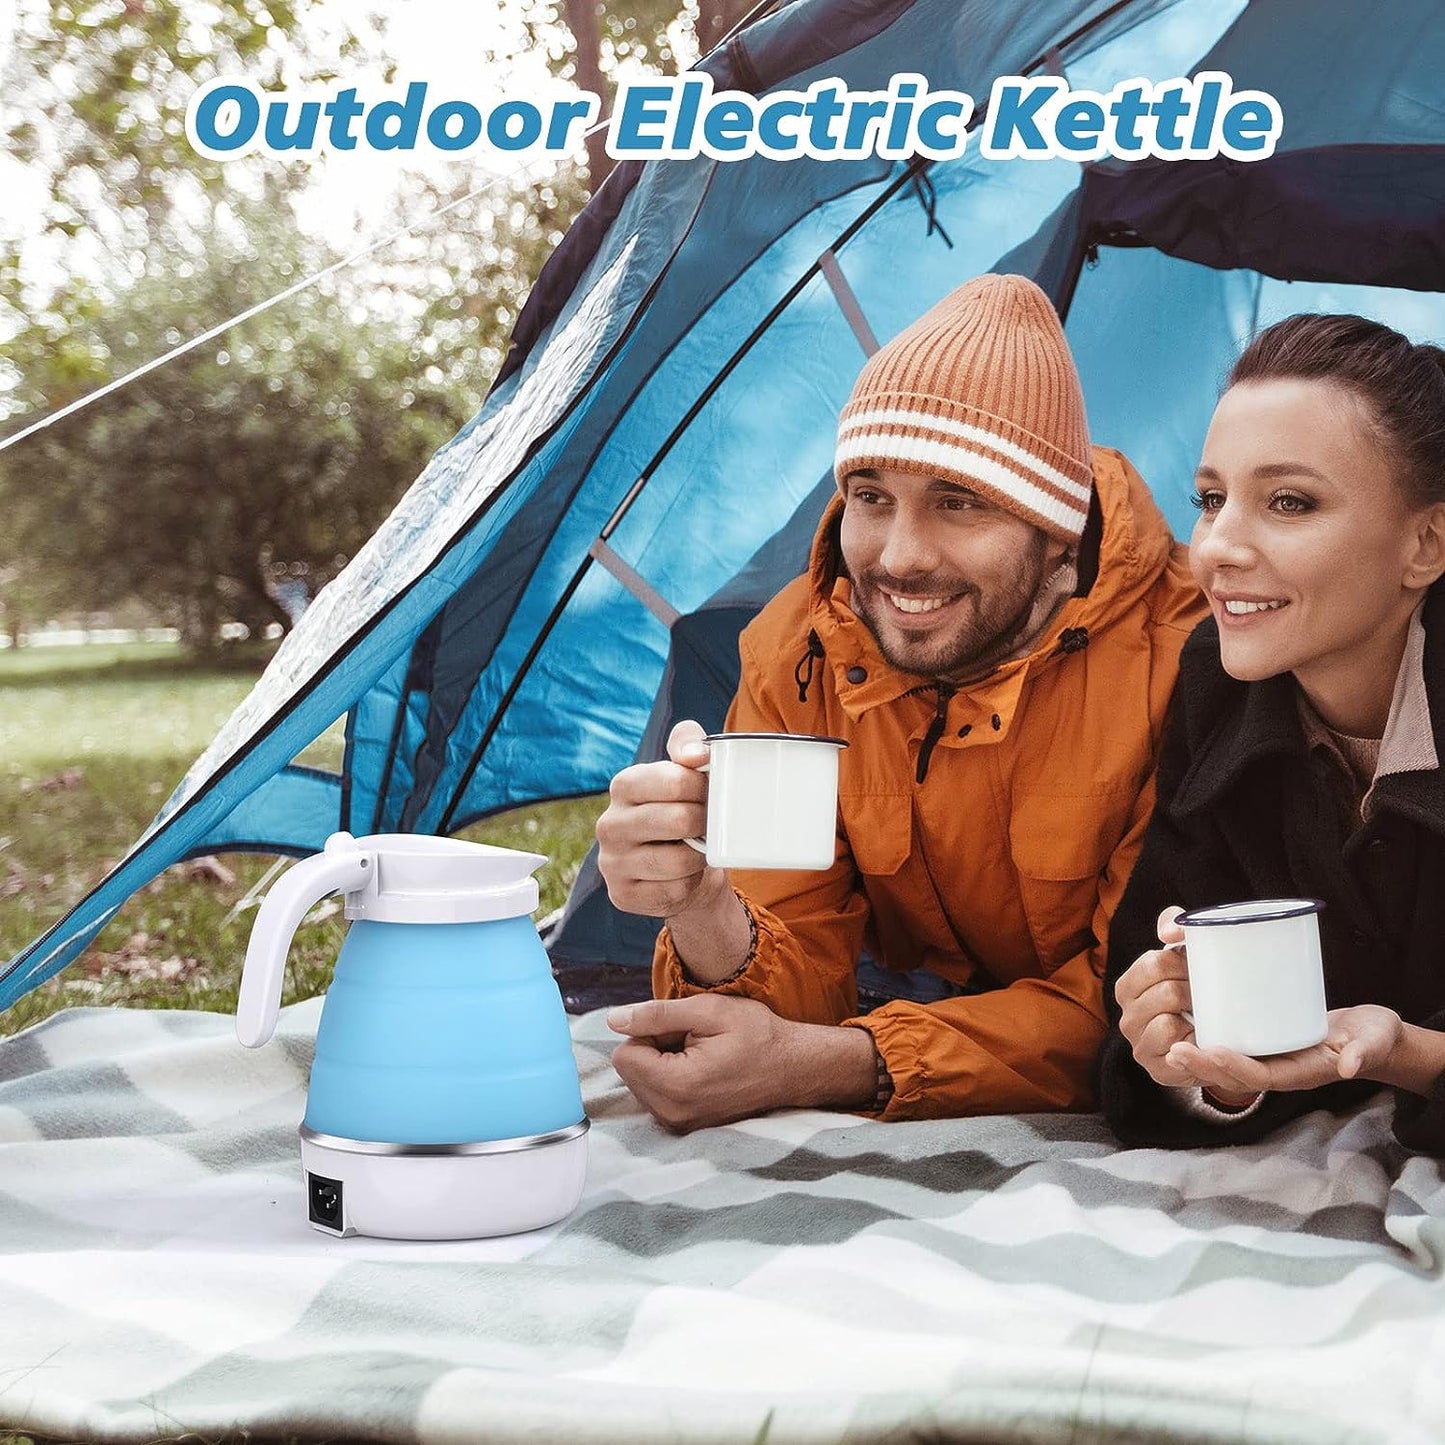 20 oz max (600ml) Foldable Electric Kettle, Camping Kettle, Mini Travel Kettle